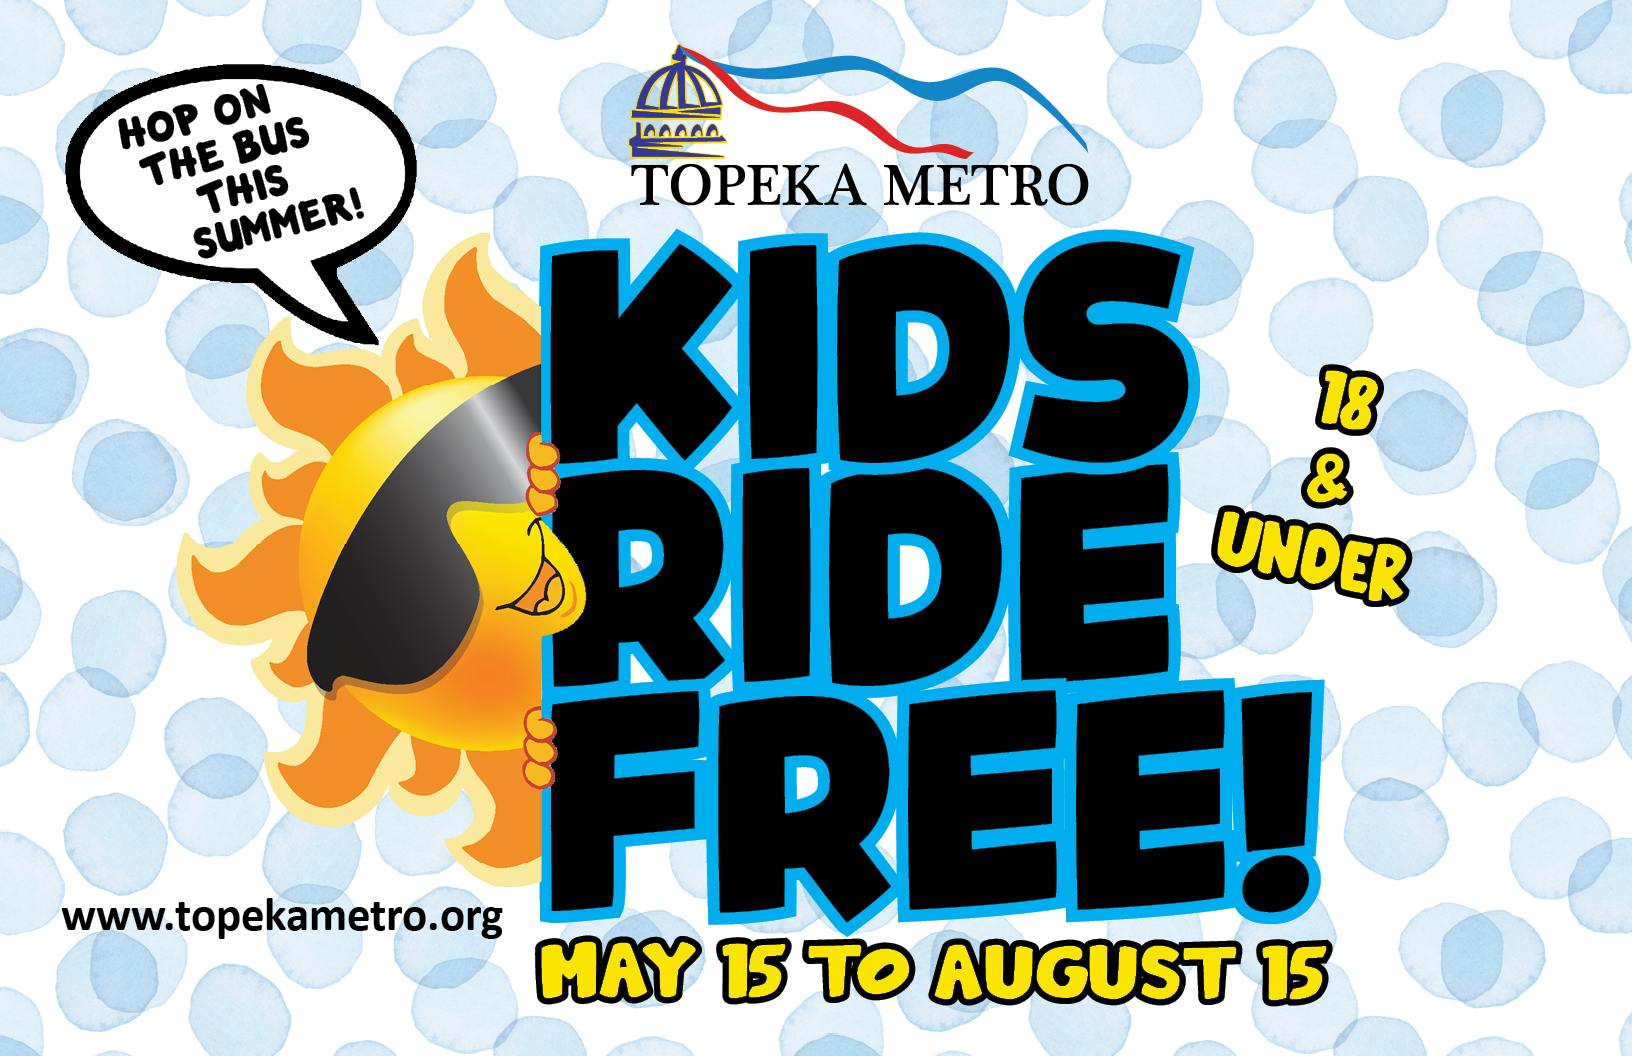 Kids Ride FREE! in 10th Year of Service